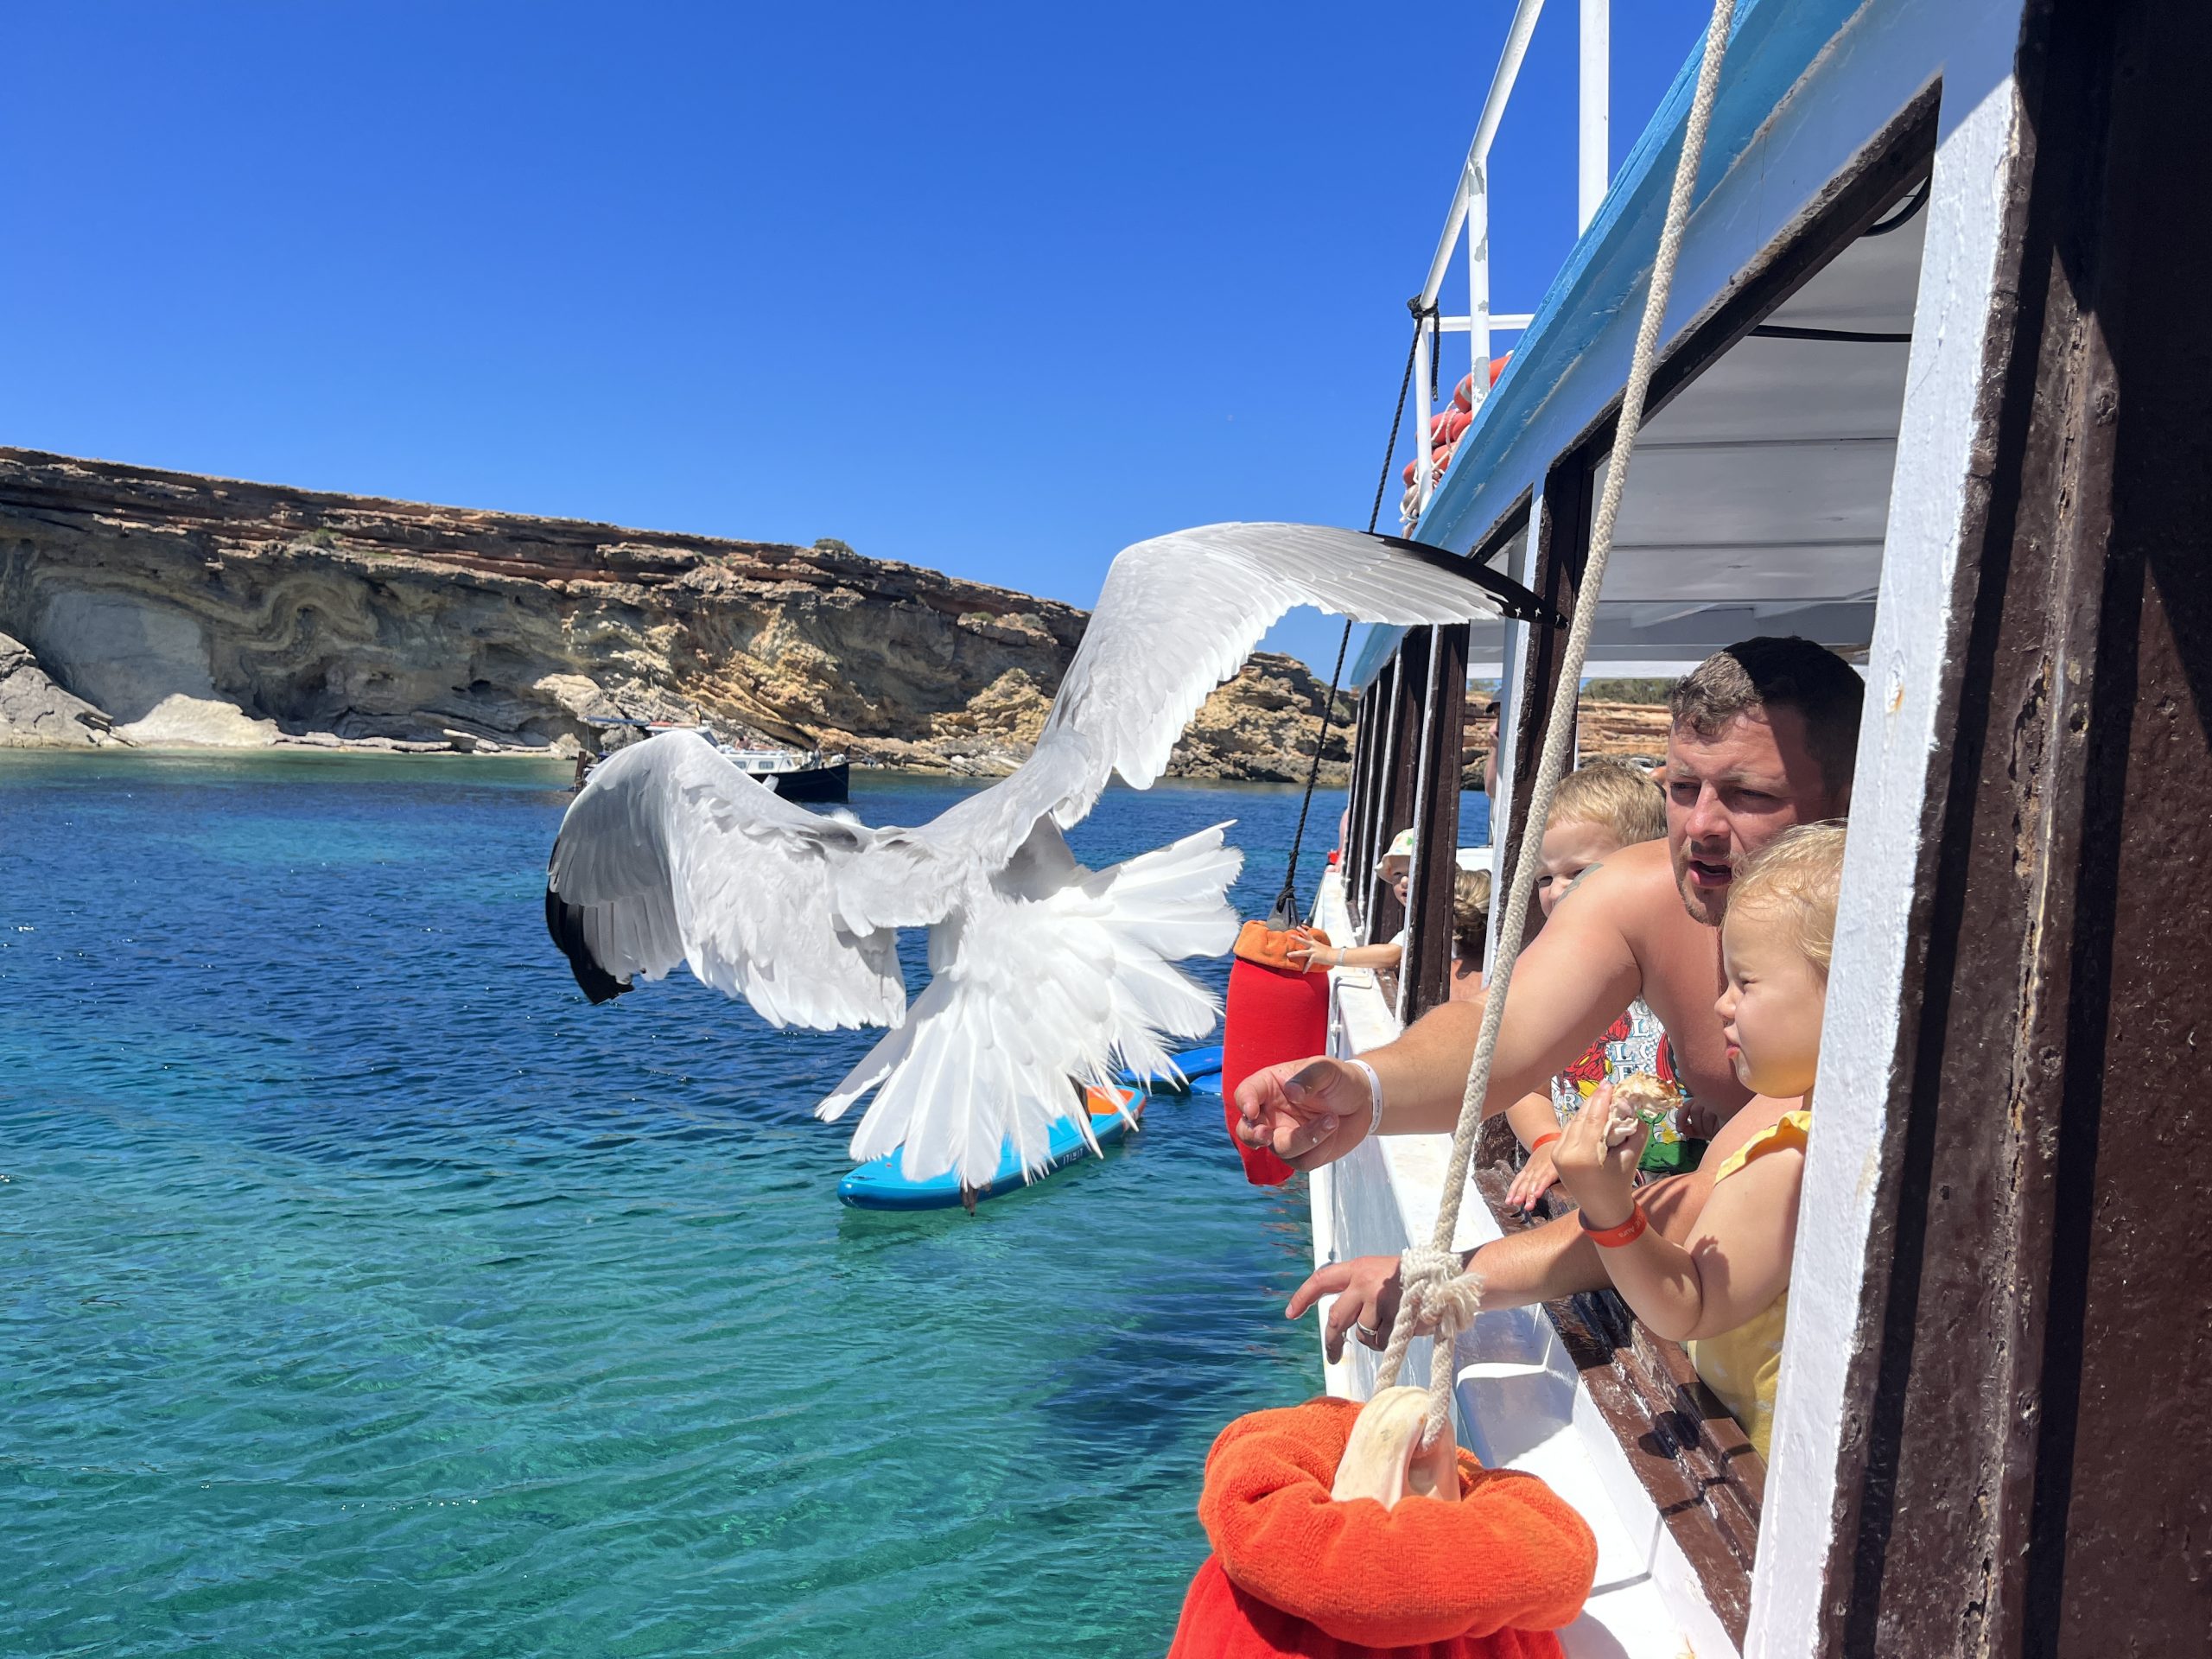 Meet the Sea boat passengers welcoming a seagull